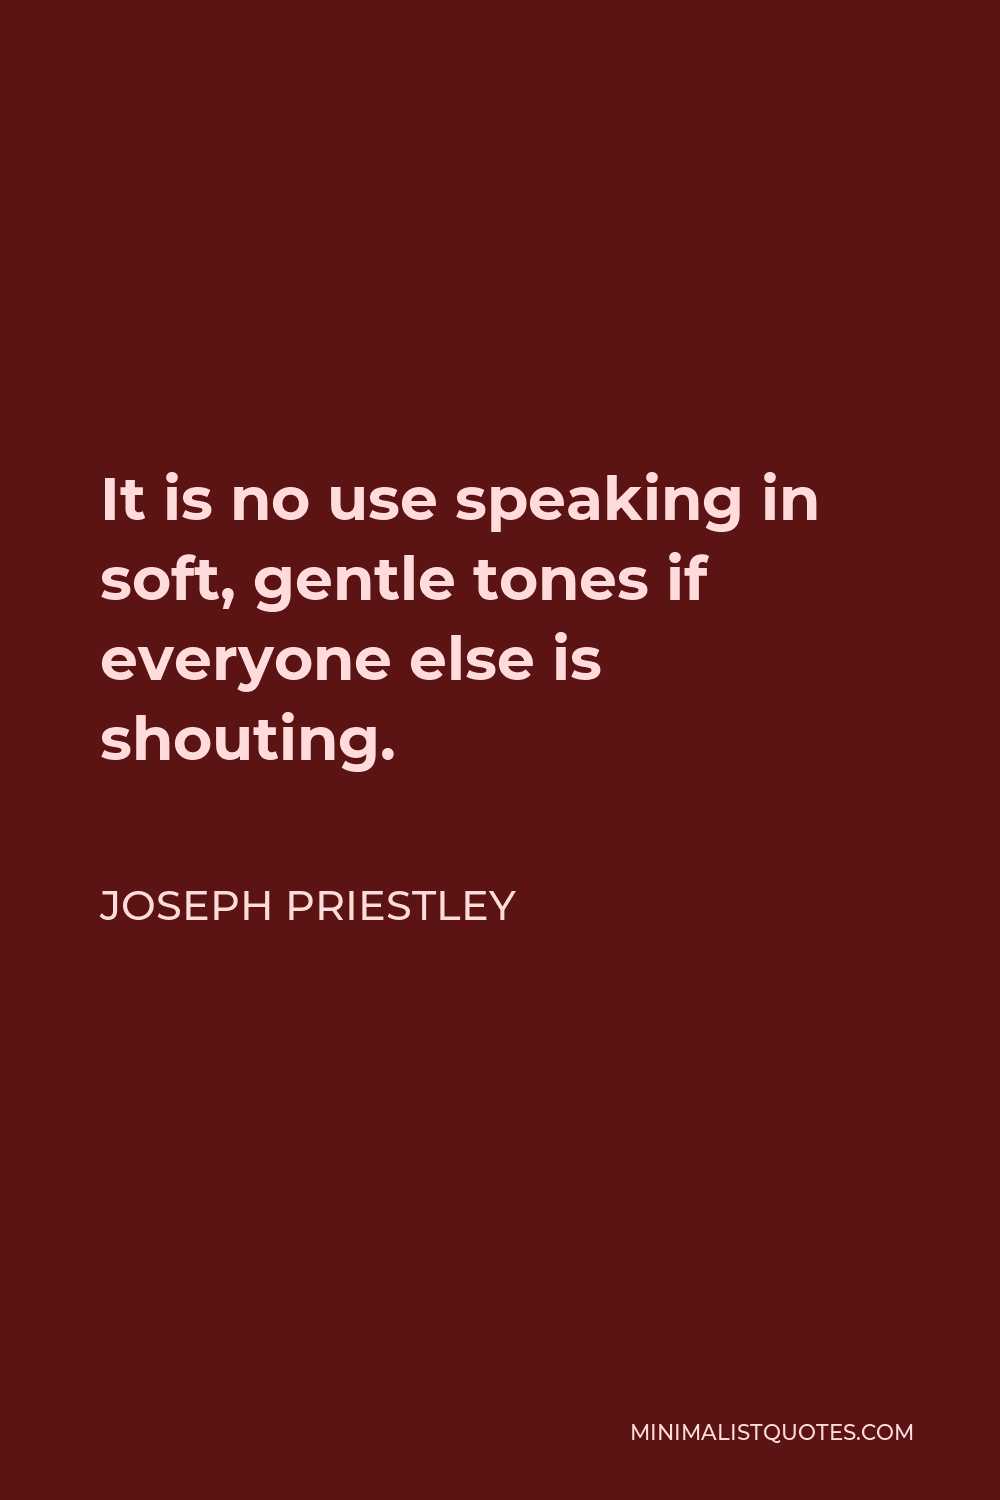 Joseph Priestley Quote - It is no use speaking in soft, gentle tones if everyone else is shouting.